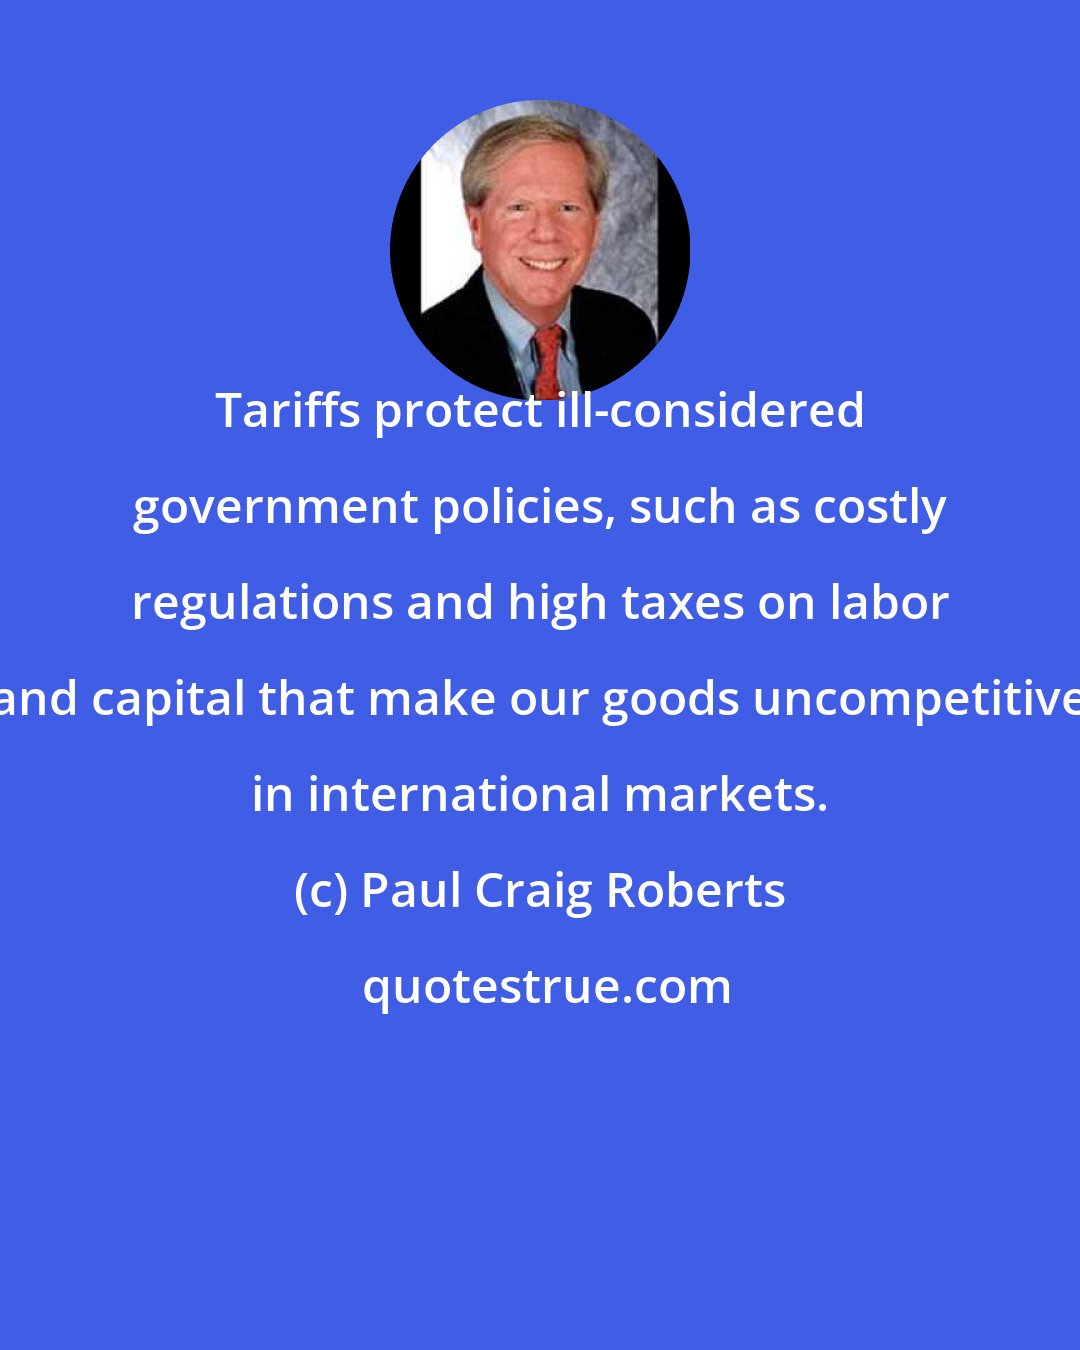 Paul Craig Roberts: Tariffs protect ill-considered government policies, such as costly regulations and high taxes on labor and capital that make our goods uncompetitive in international markets.